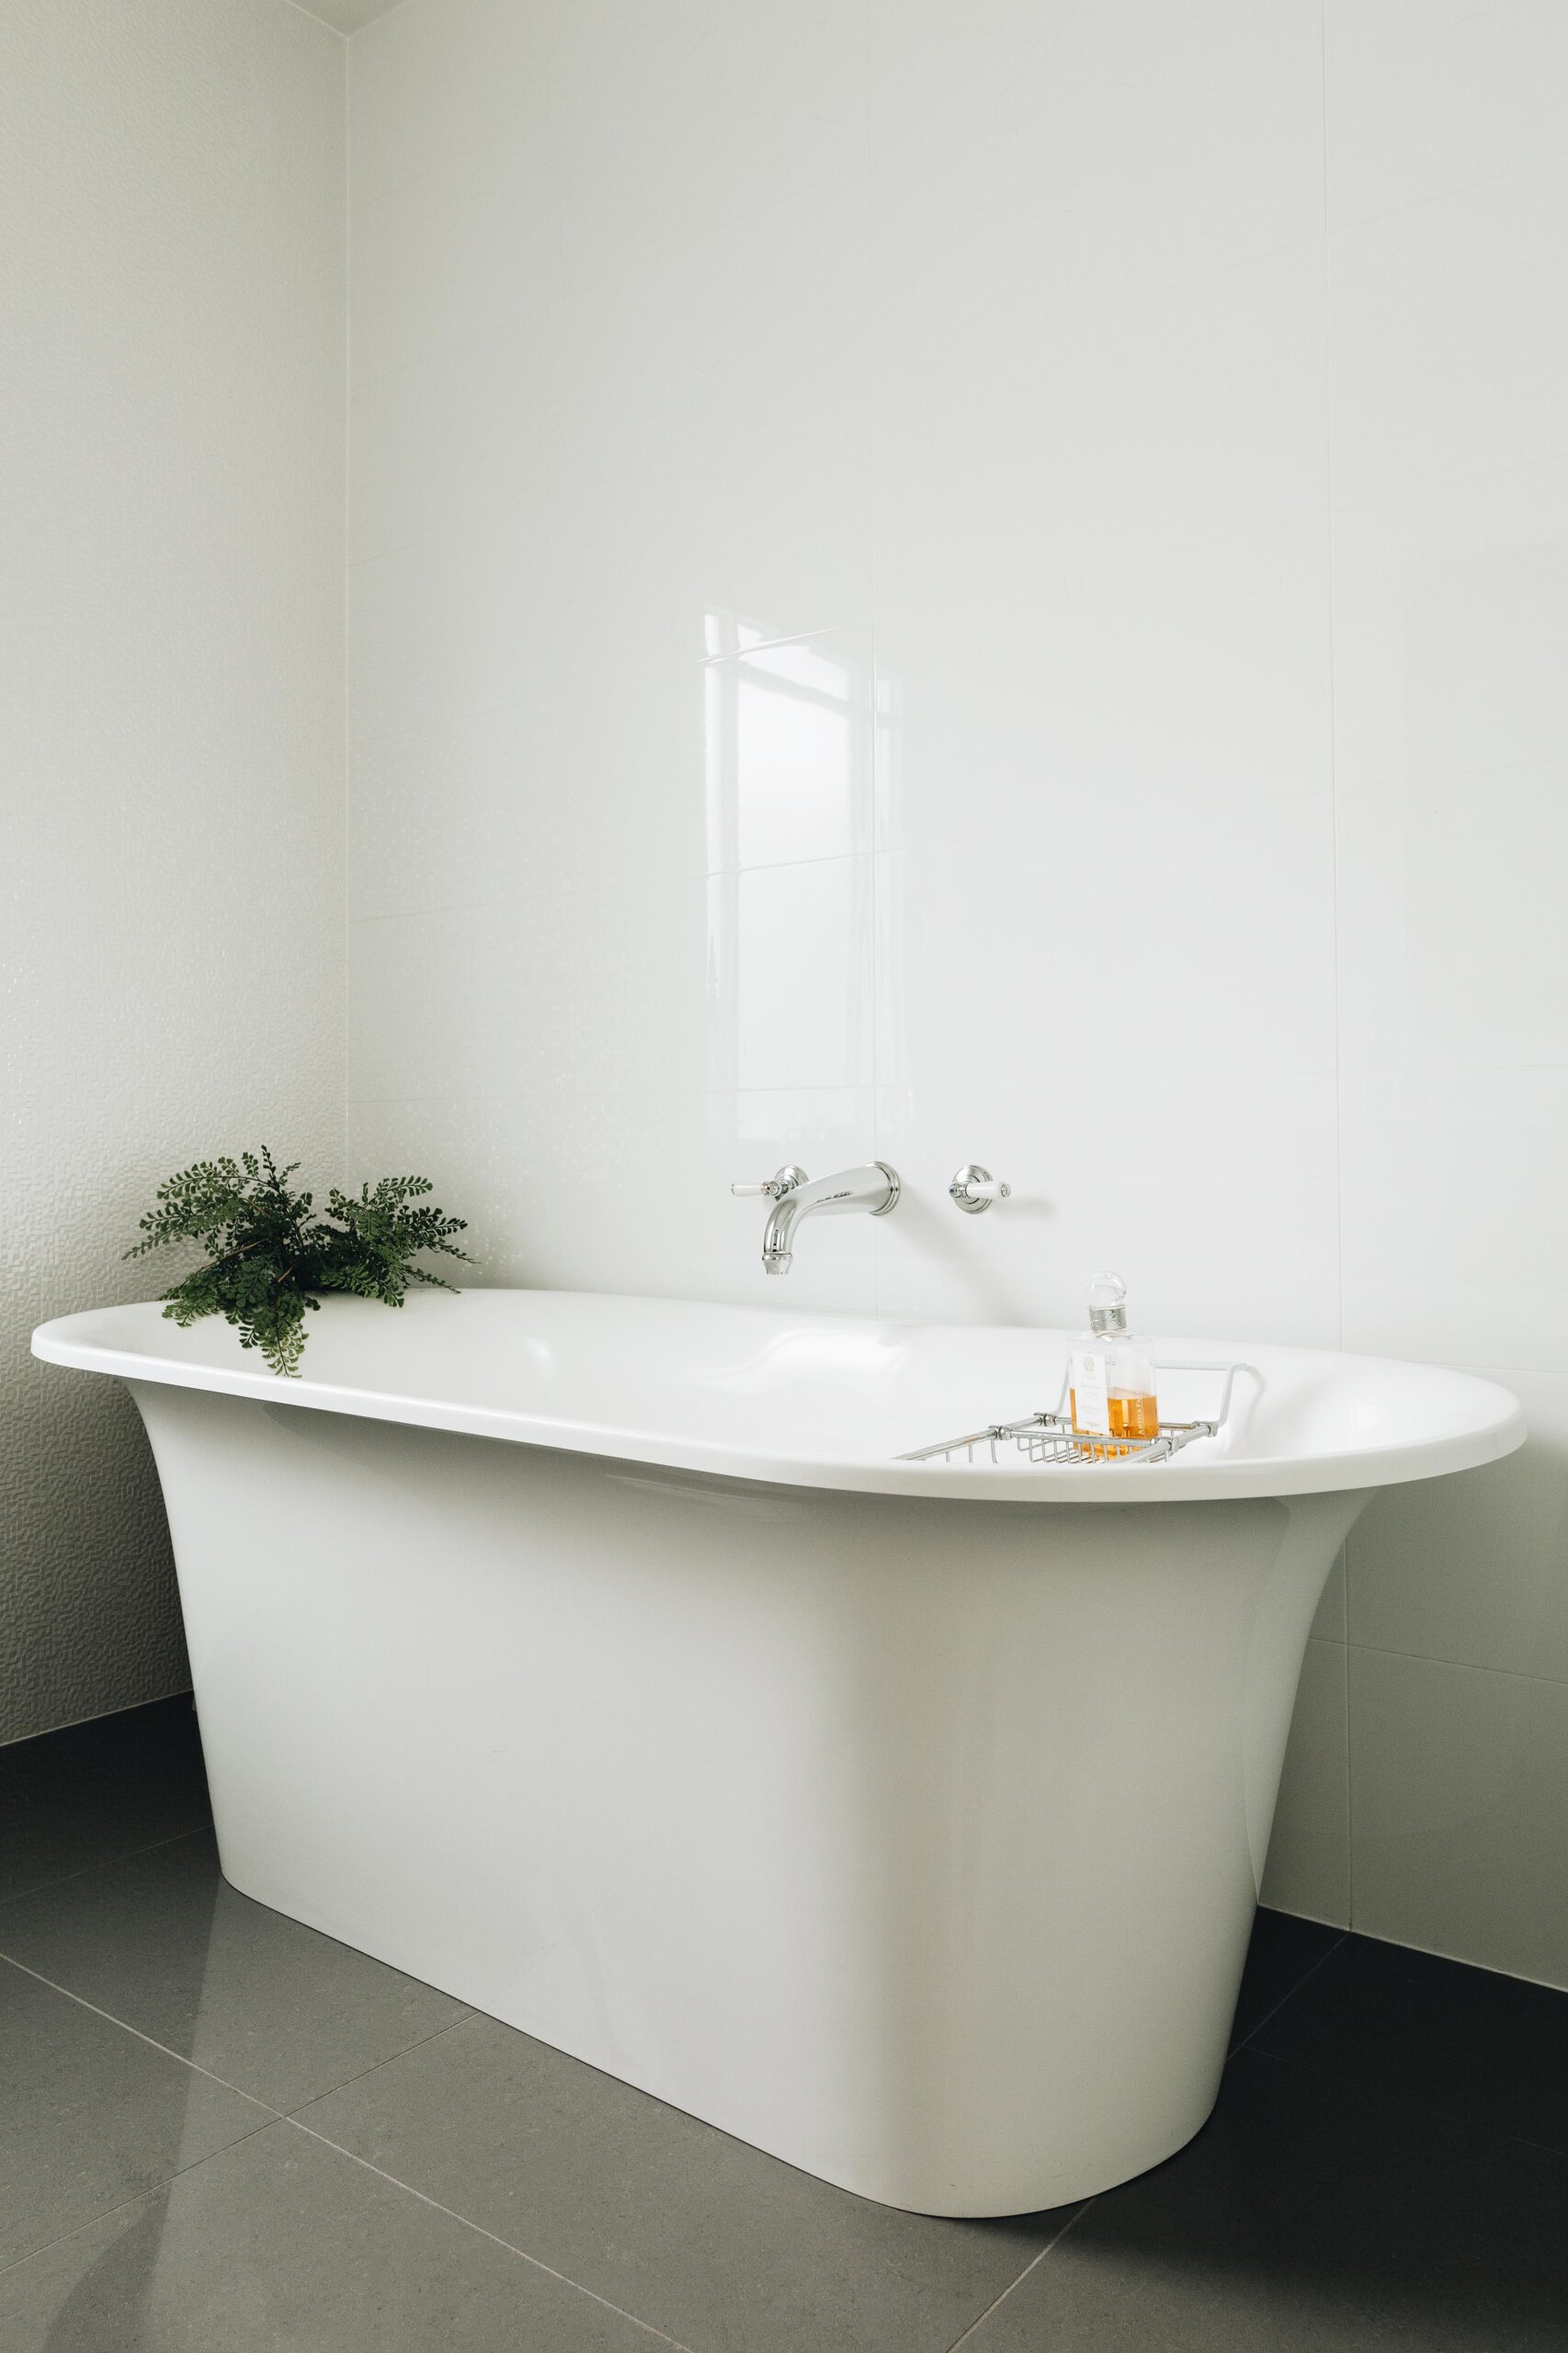 Freestanding bath on grey tiles with glossy white wall tiles